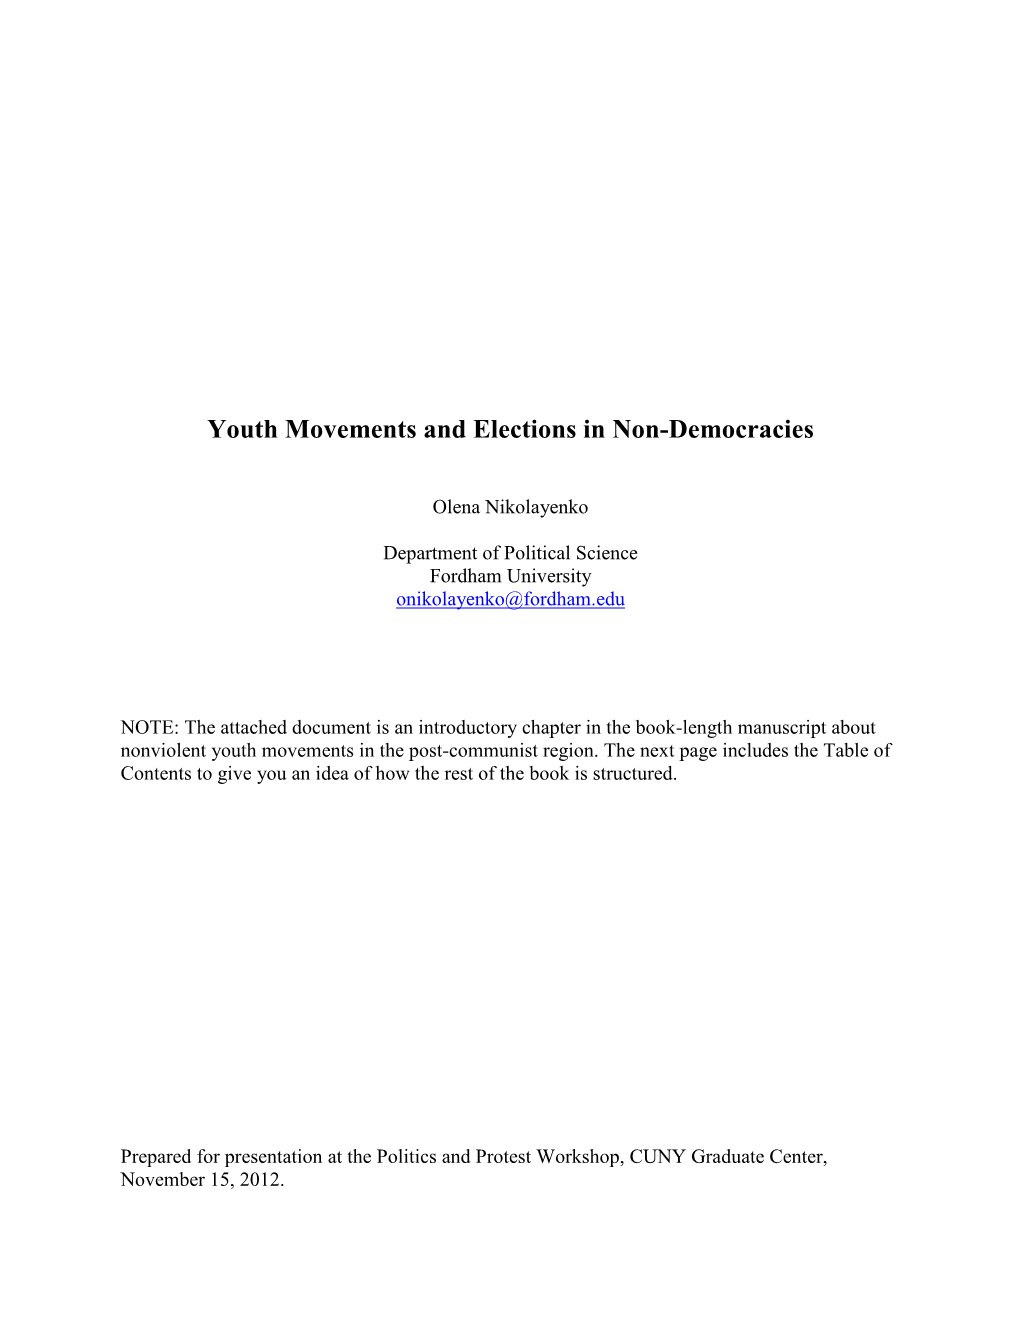 Youth Movements and Elections in Non-Democracies